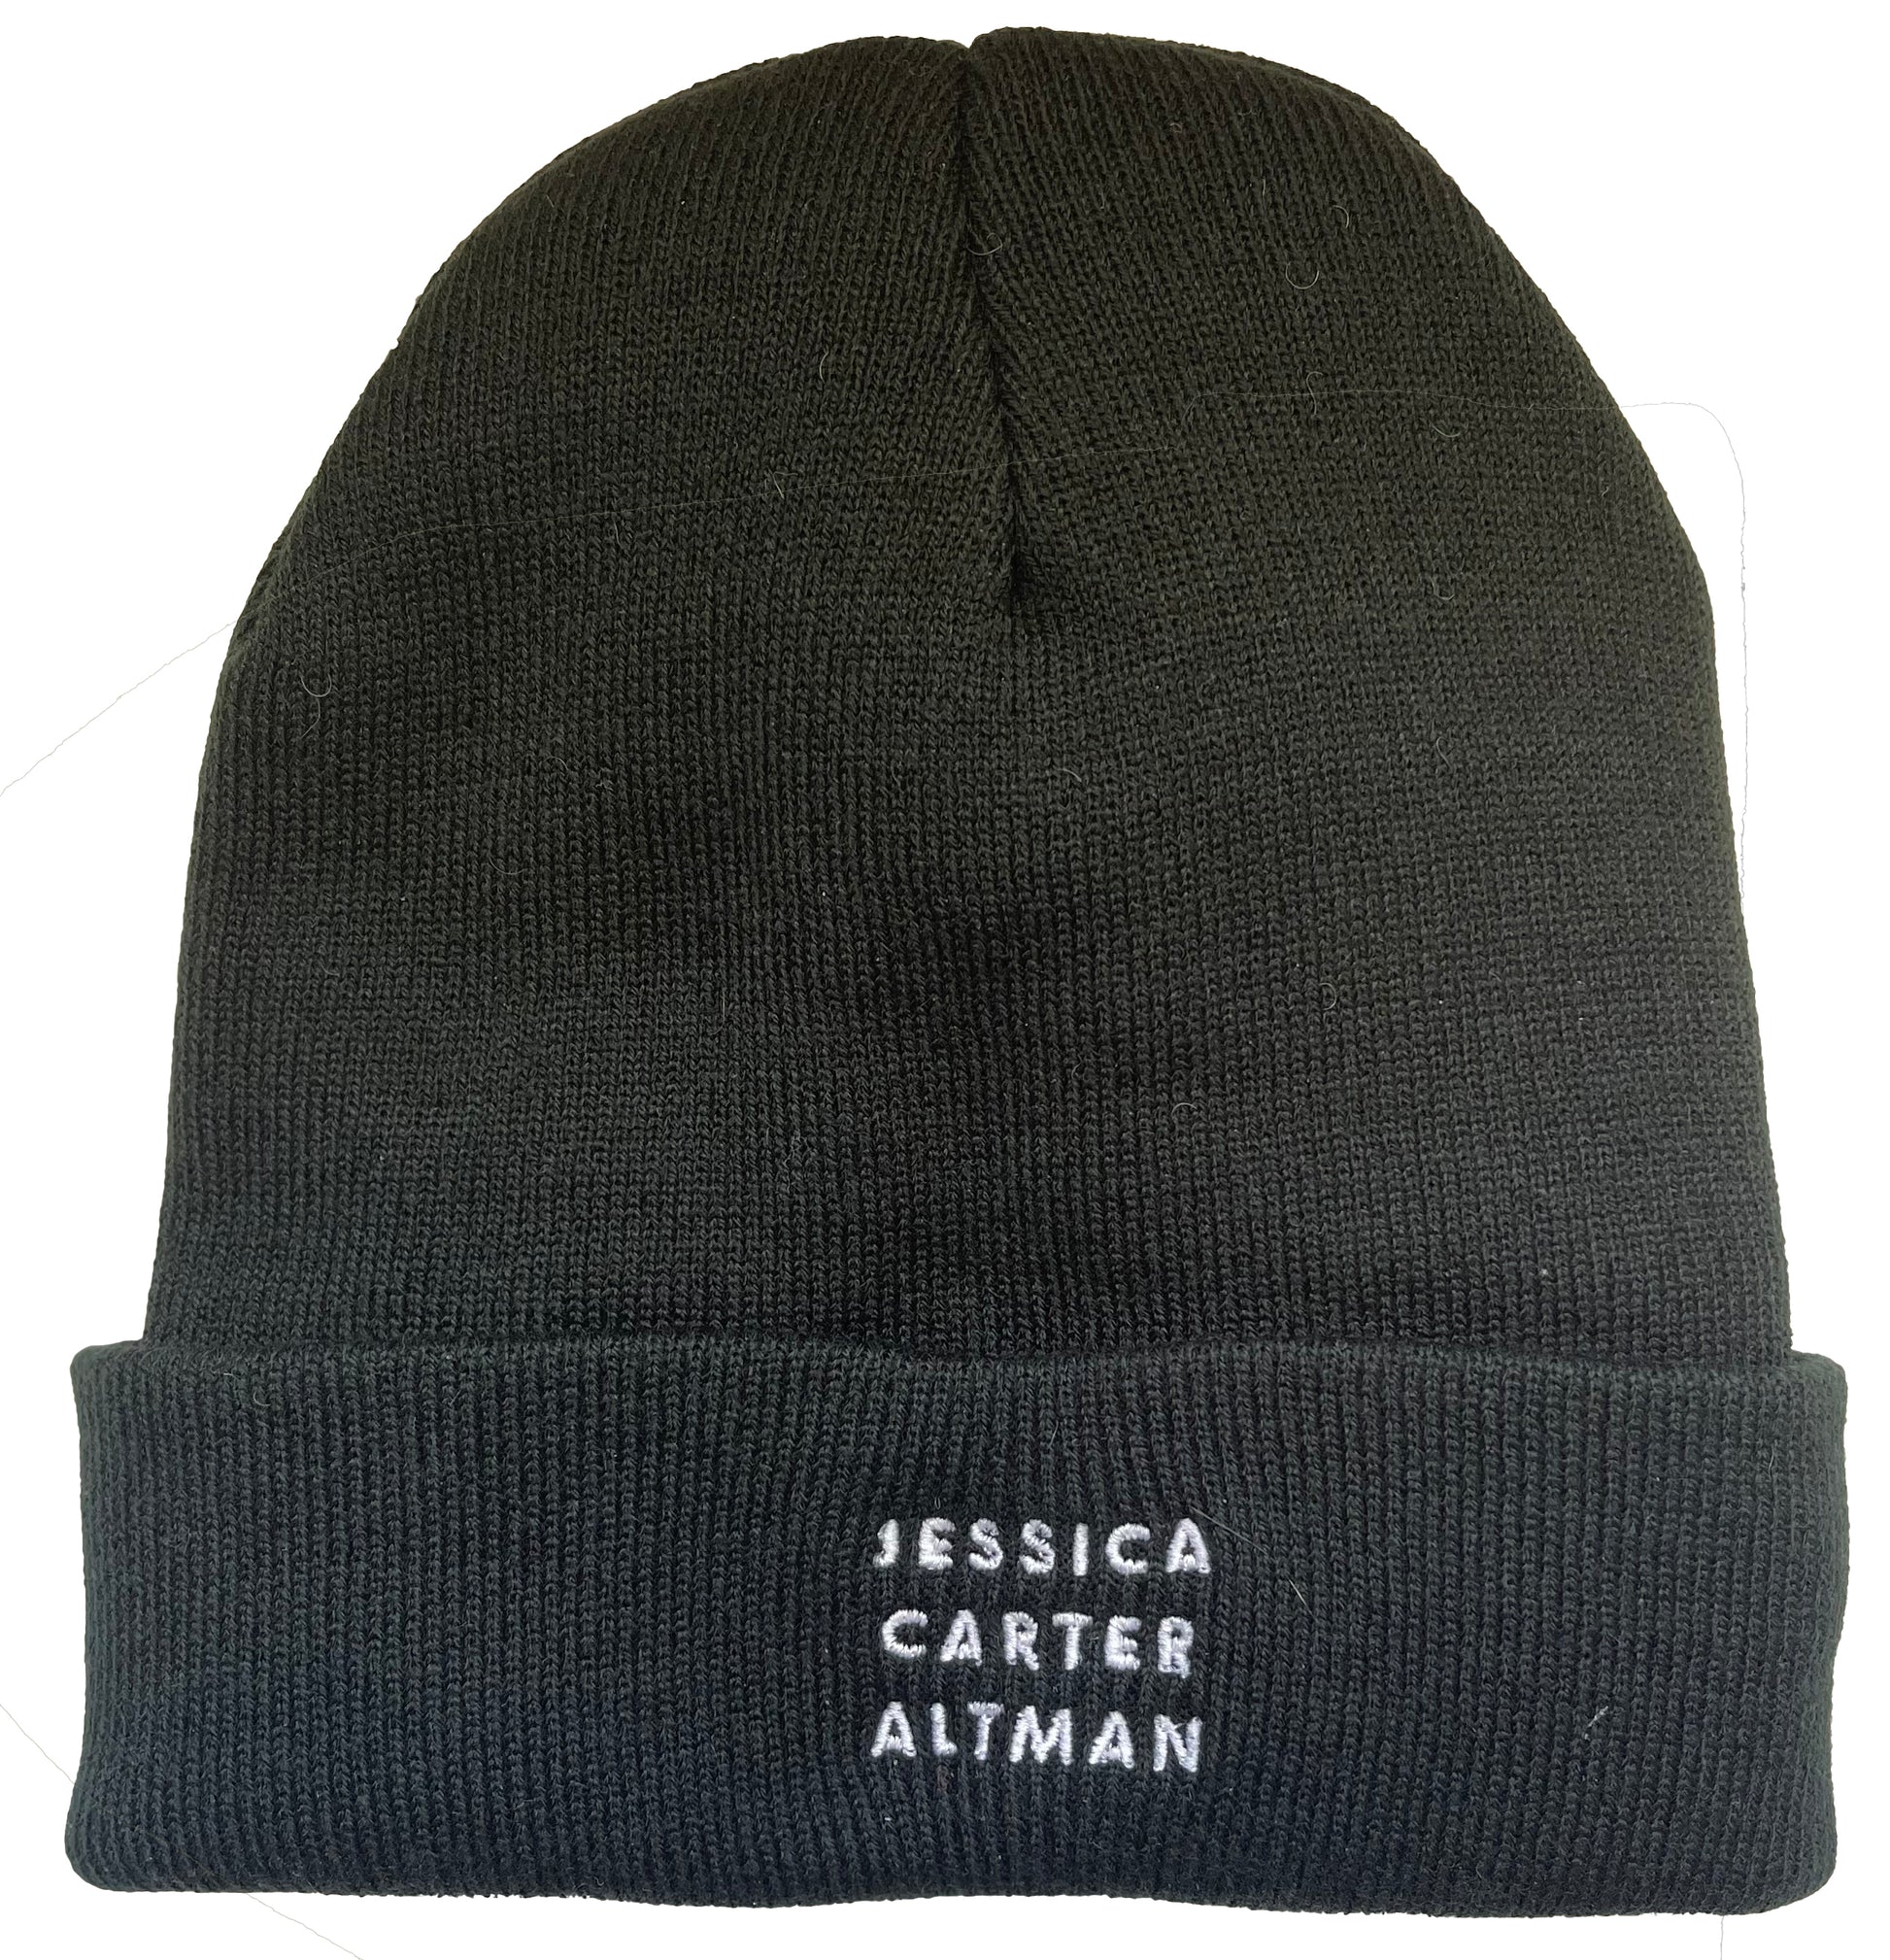 Jessica Carter Altman embroidered on fleece-lined knit cap